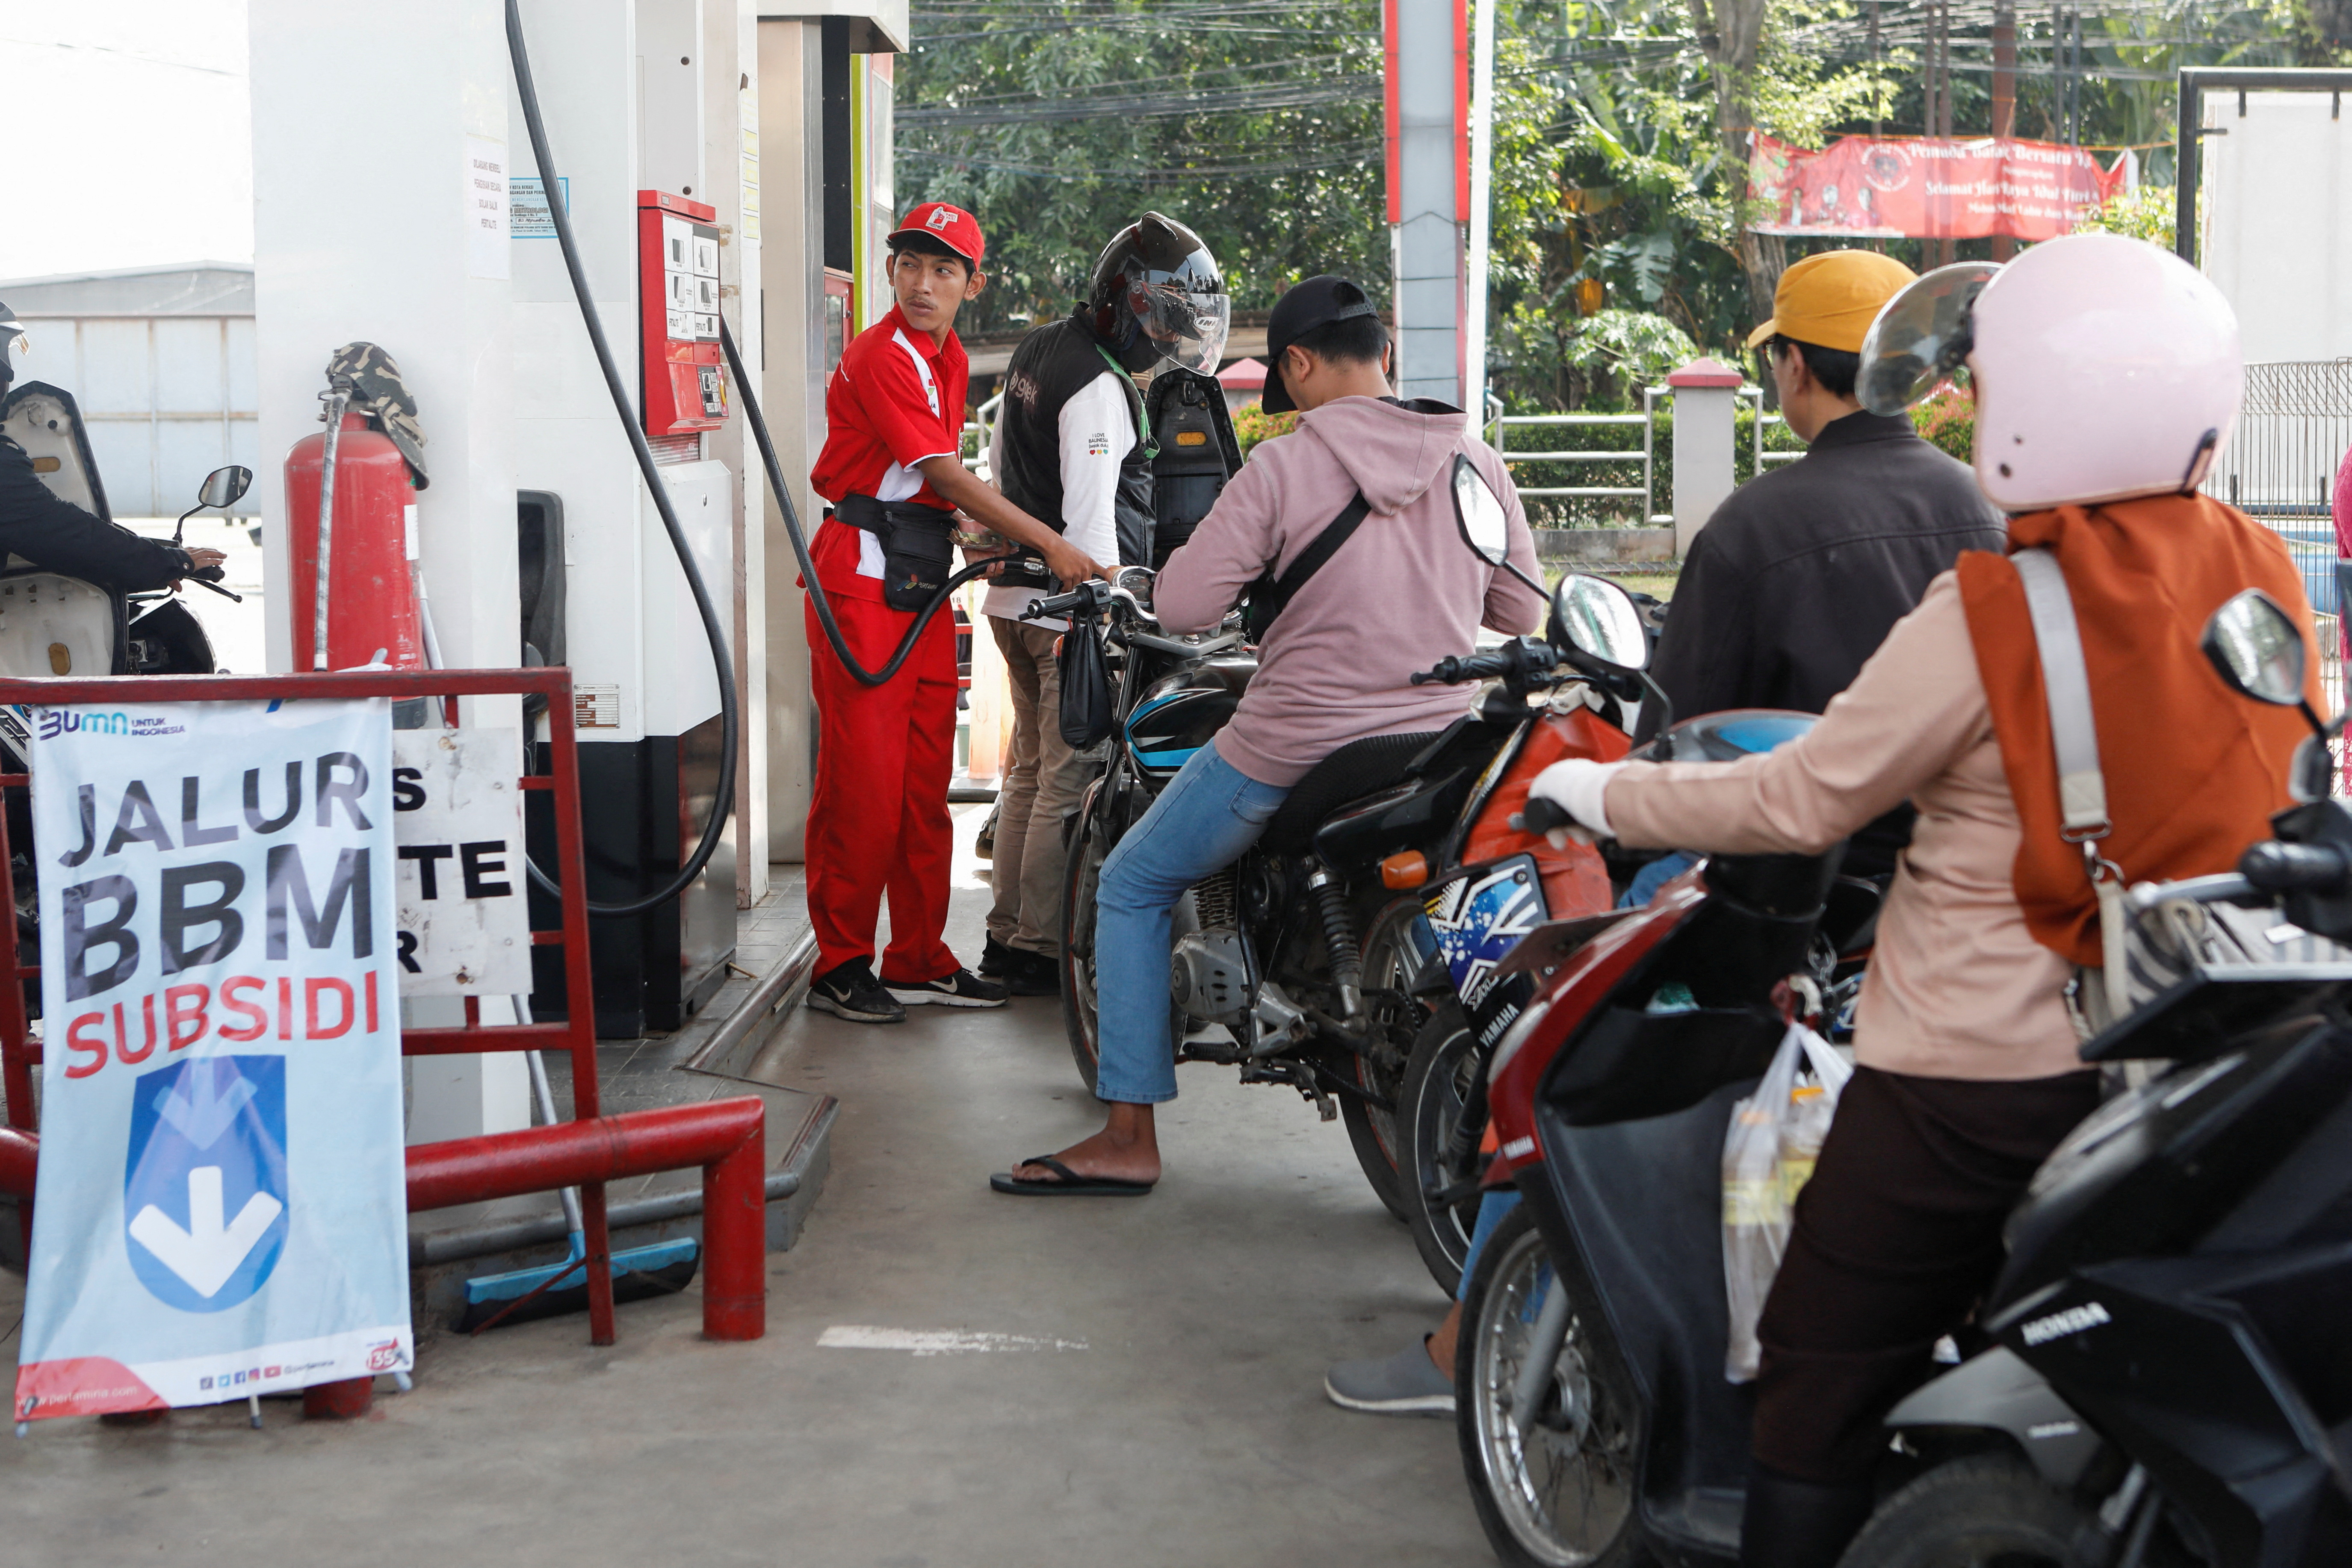 A worker of a petrol station of the state-owned company Pertamina fills a motorcycle with subsidised fuel after the announcement of a fuel price hike, in Bekasi